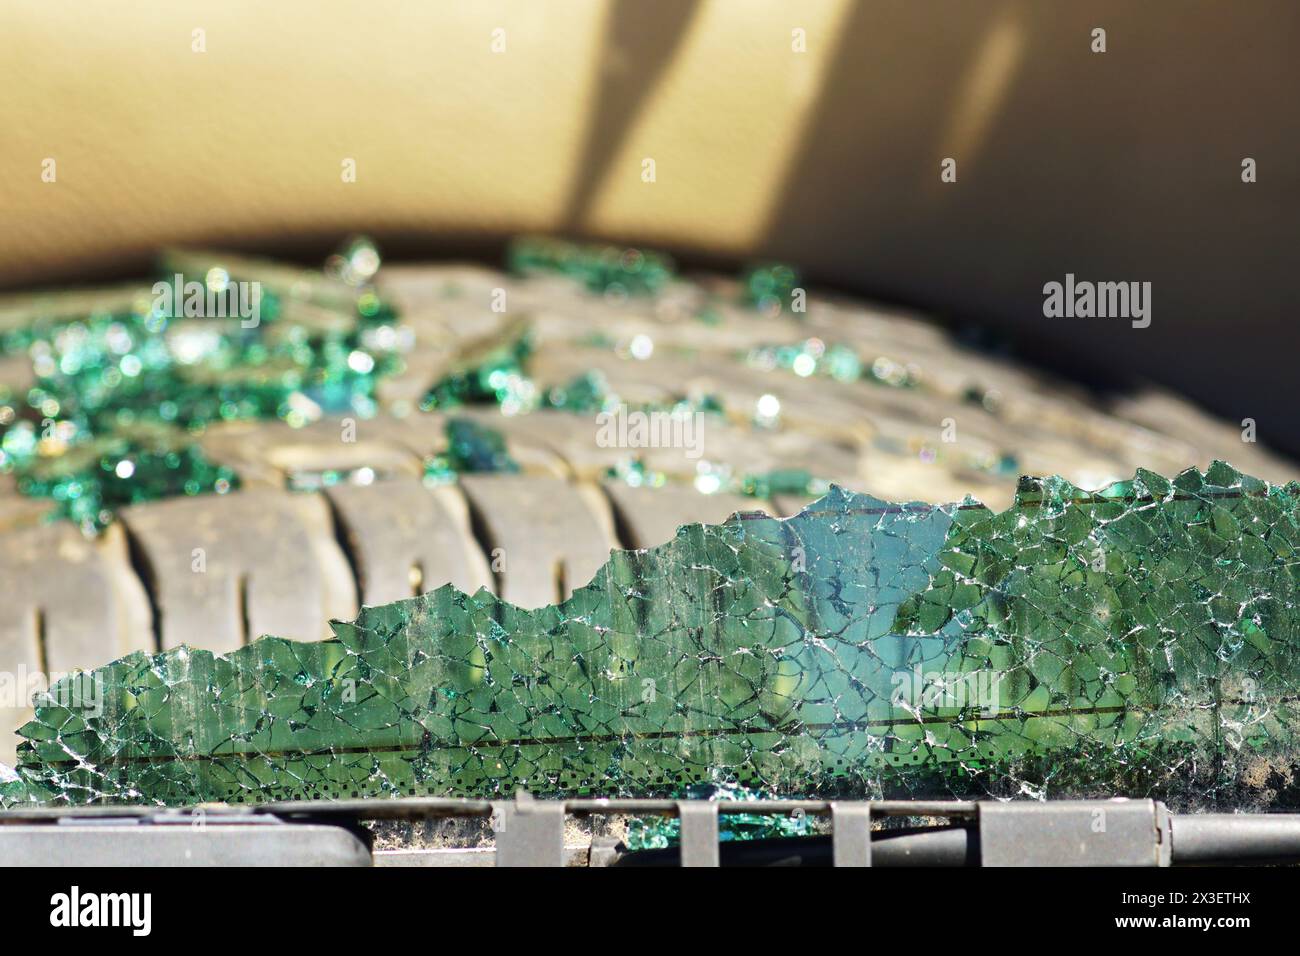 A cracked rear window of a car and glass shards lying on a spare tire in the background Stock Photo